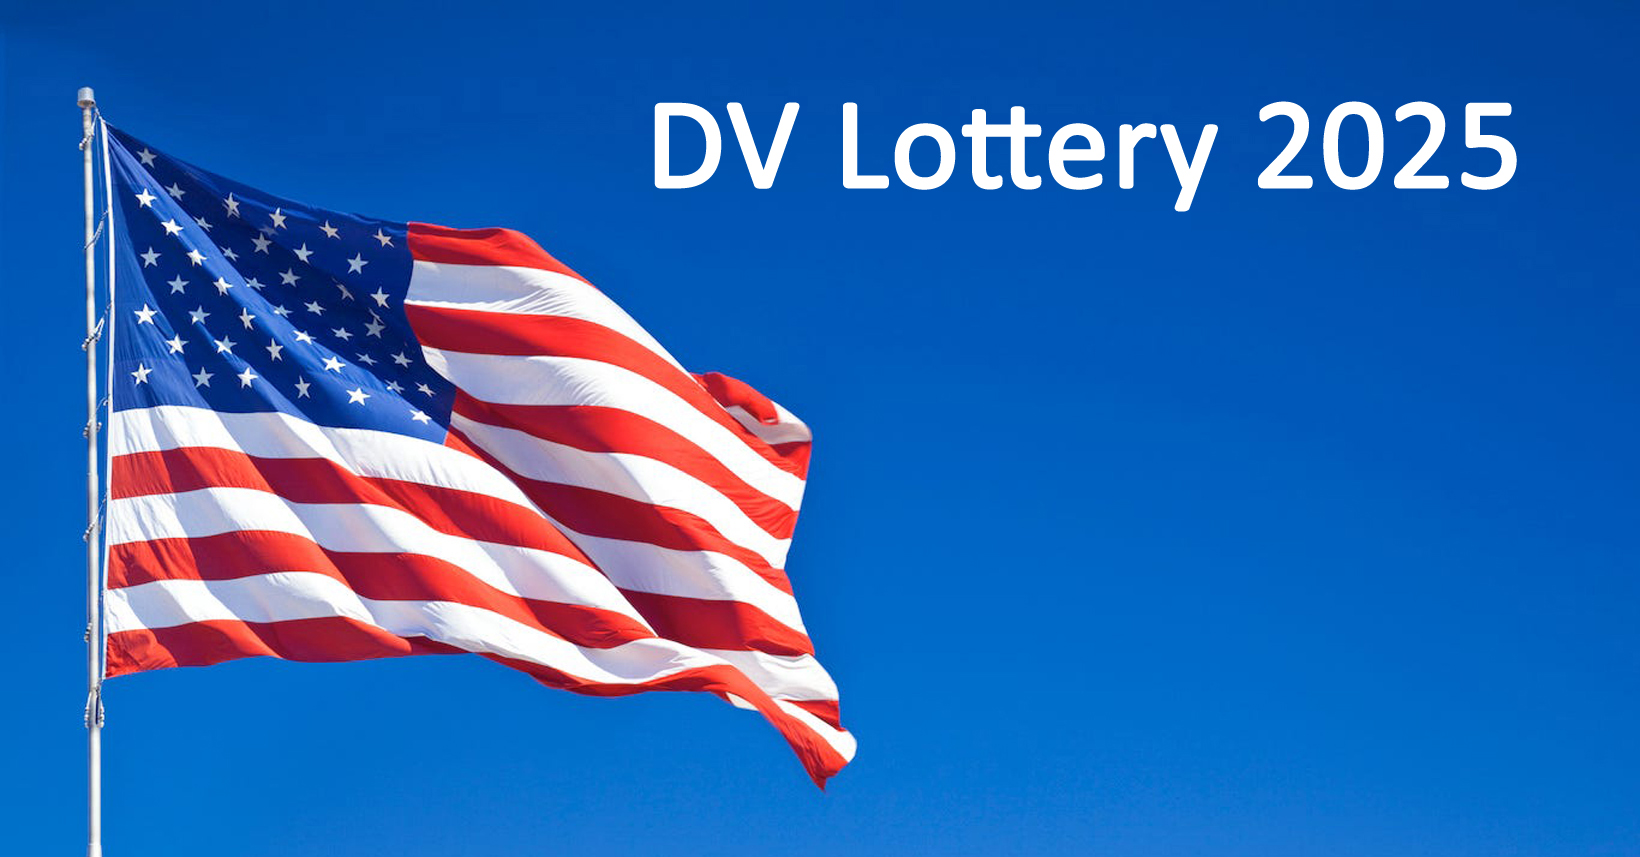 dv lottery photo crop tool online free